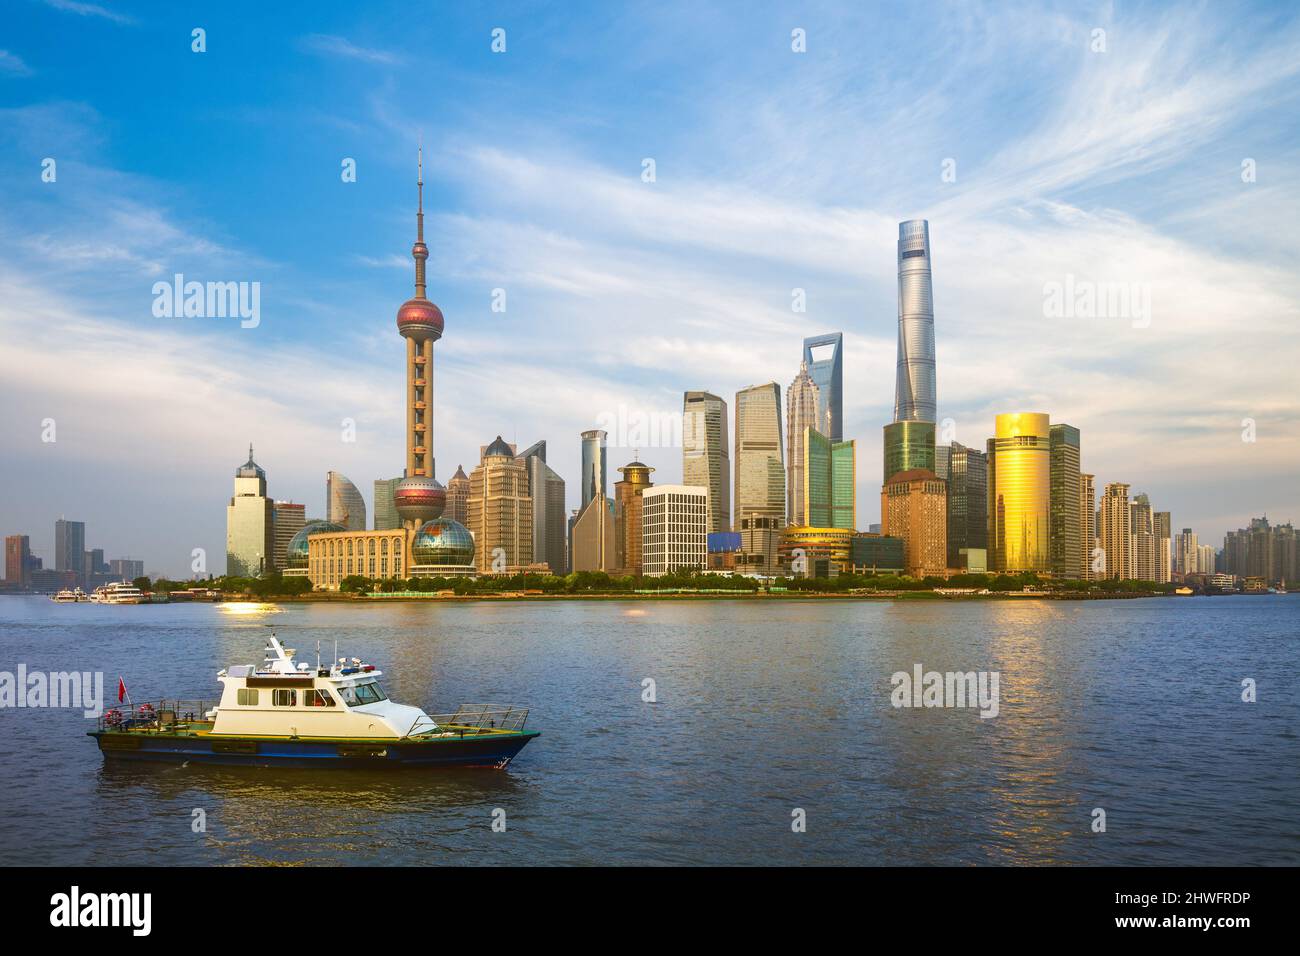 Skyline of Pudong district by Huangpu River in Shanghai, China Stock Photo